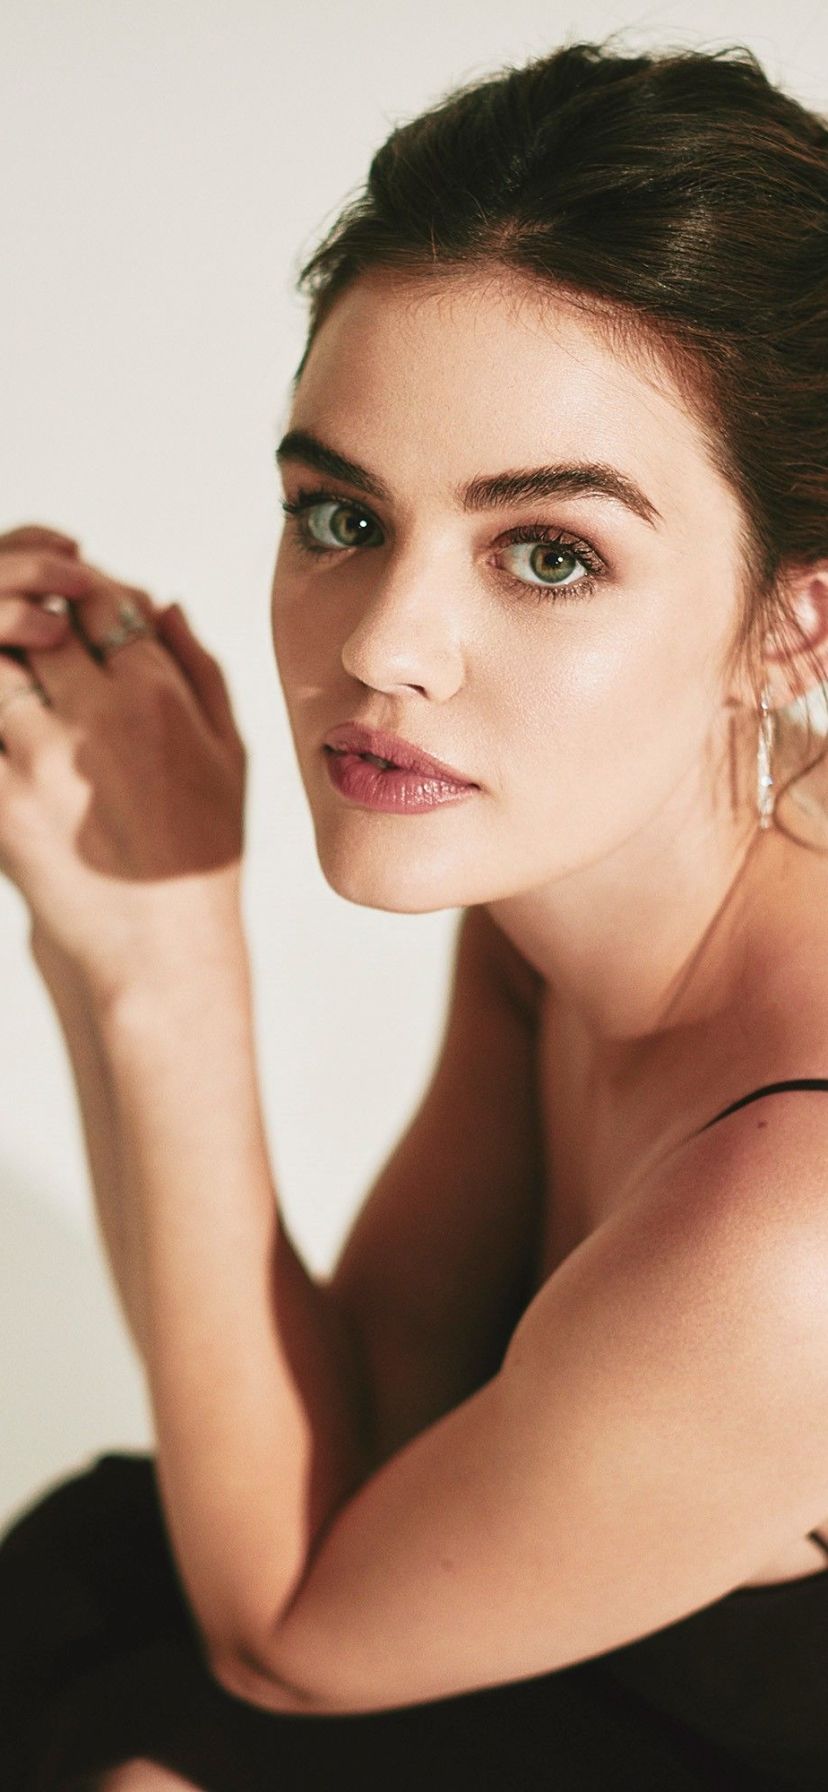 Lucy Hale Mobile Wallpaper. Lucy hale, Lucy, Hale